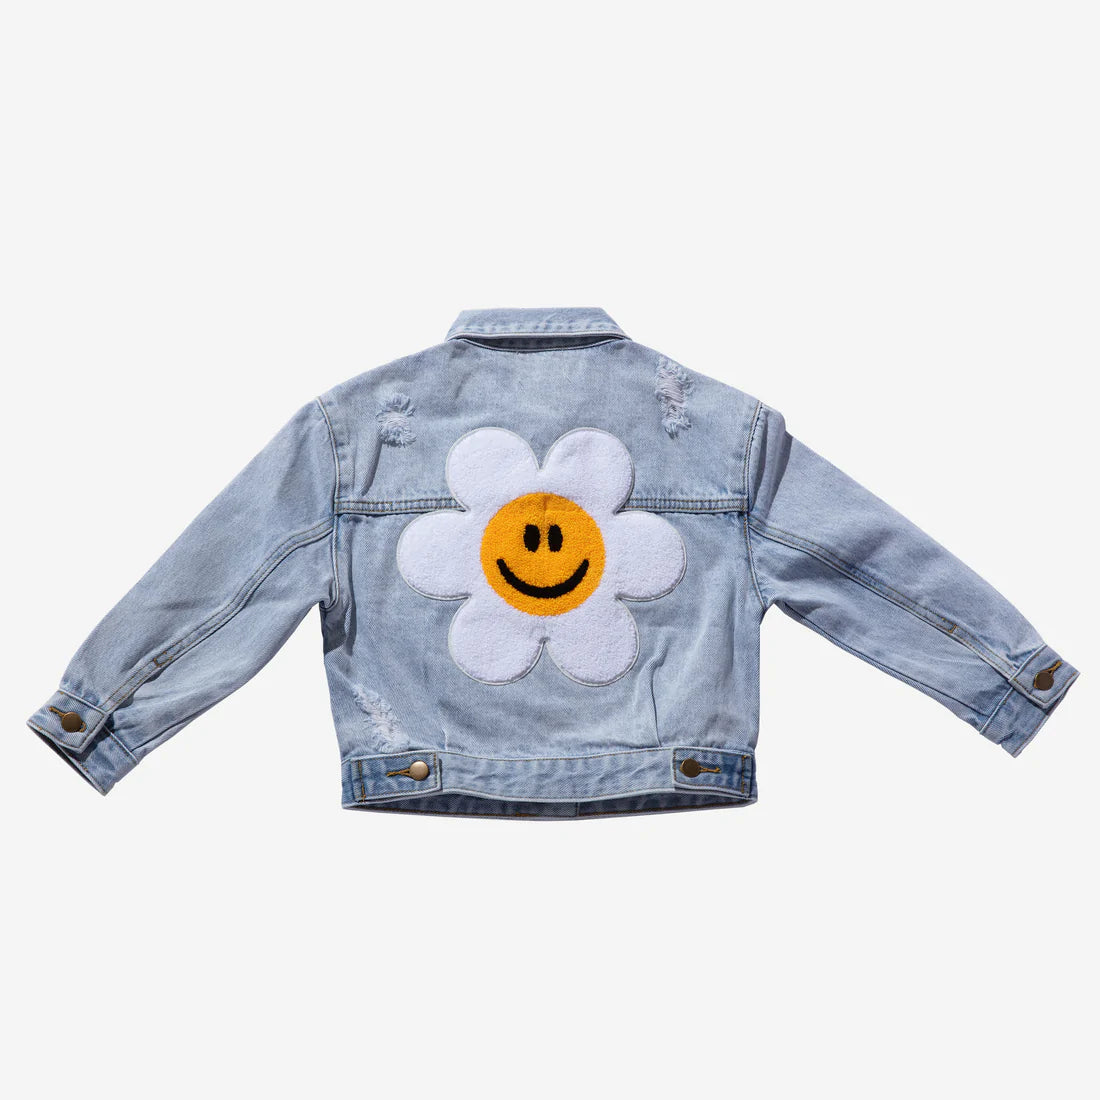 PETITE HAILEY PATCHED DENIM JACKET - DAISY